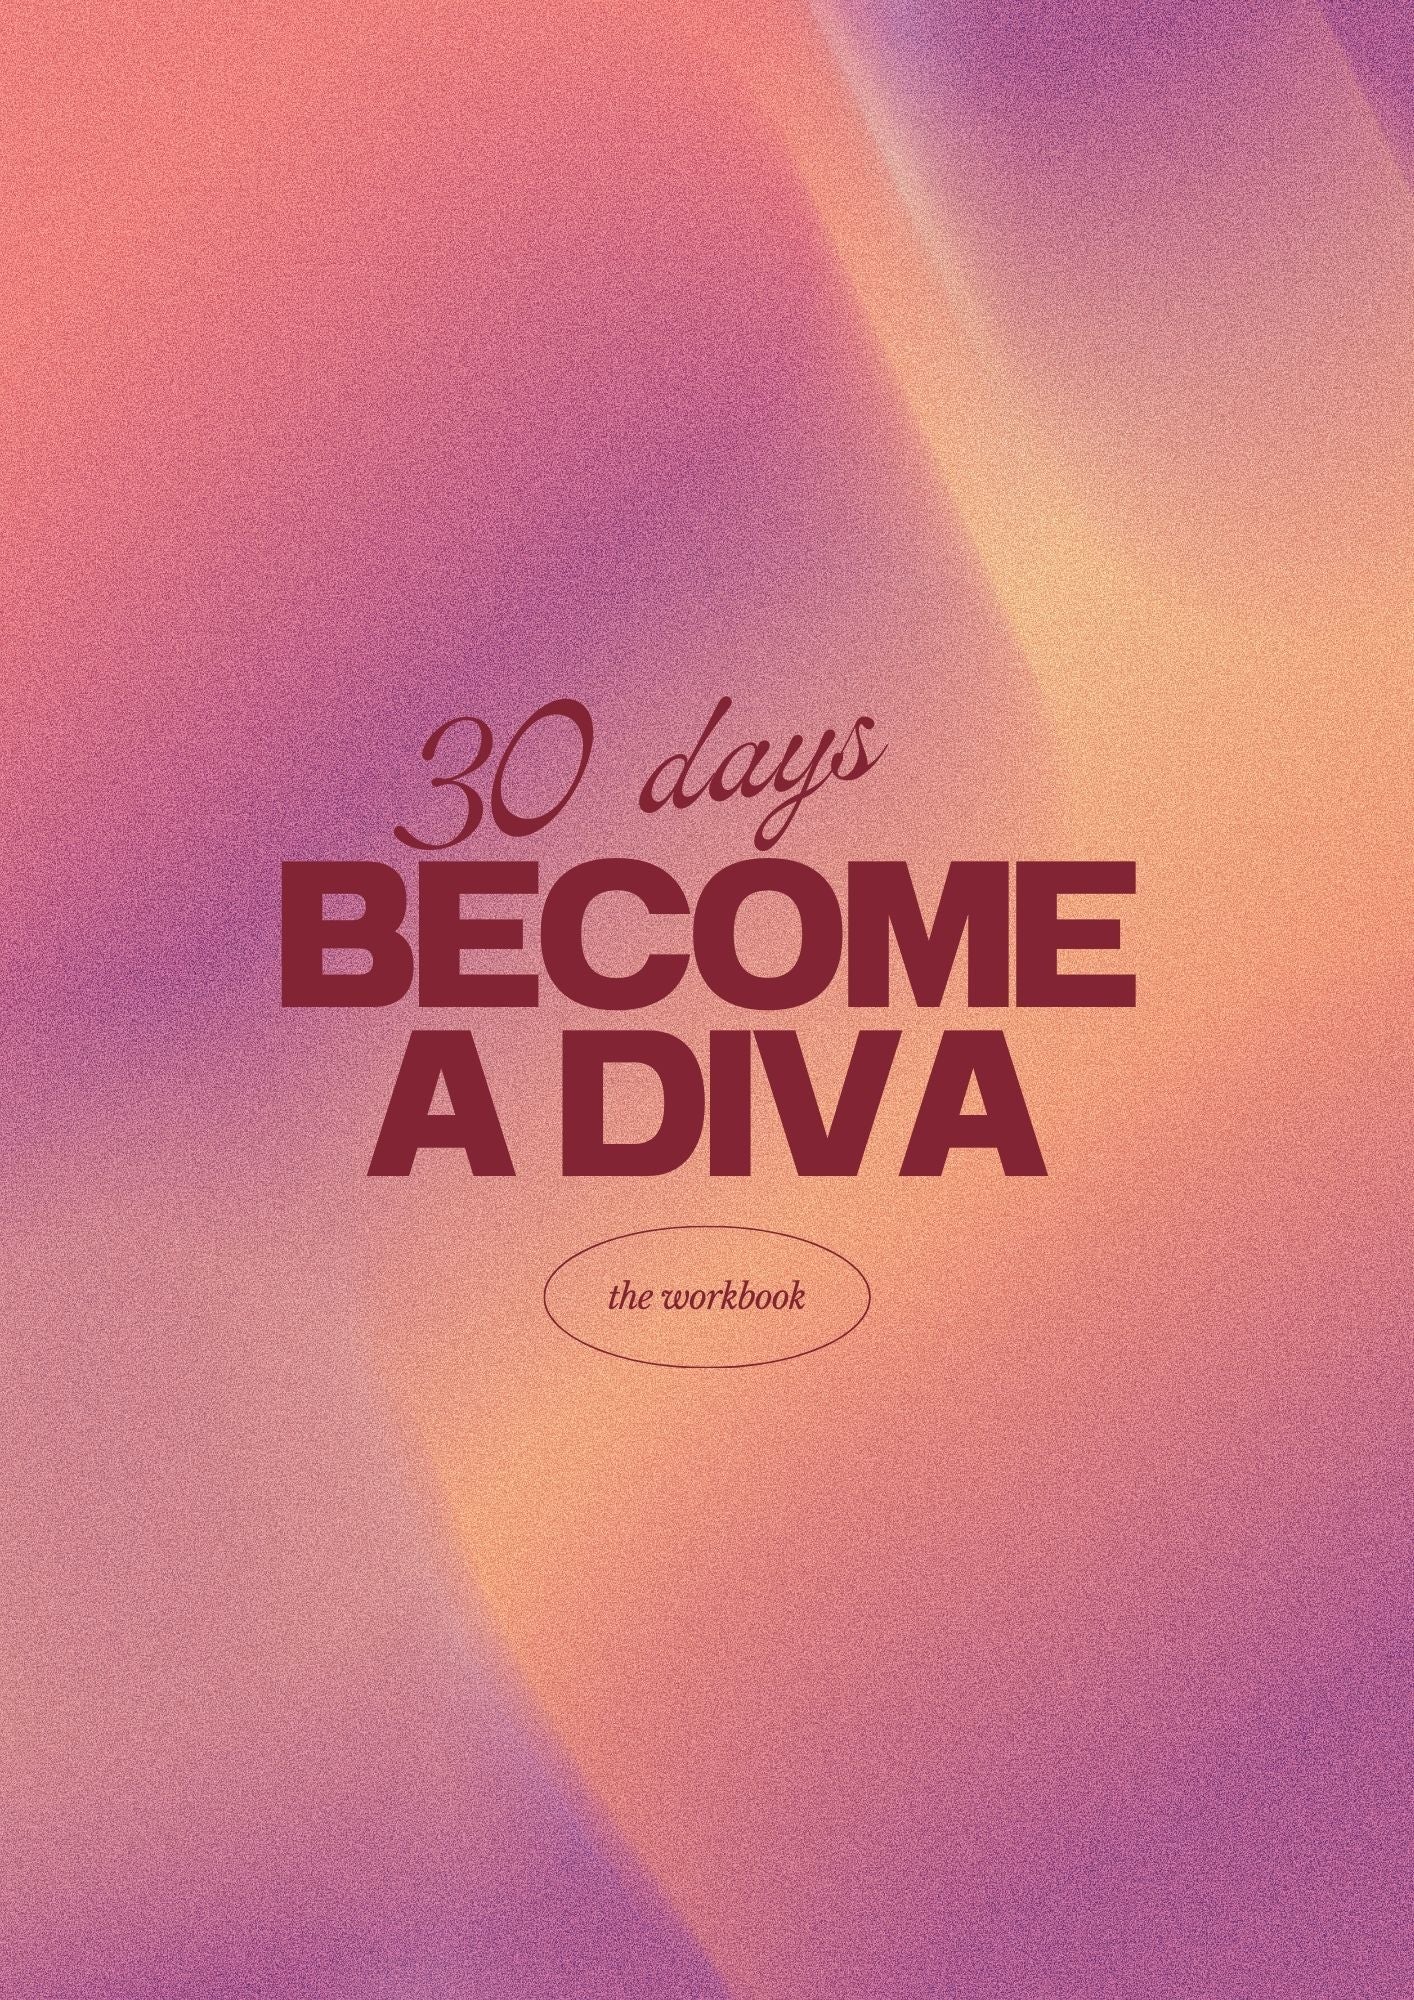 Become A Diva - 30 day Workbook